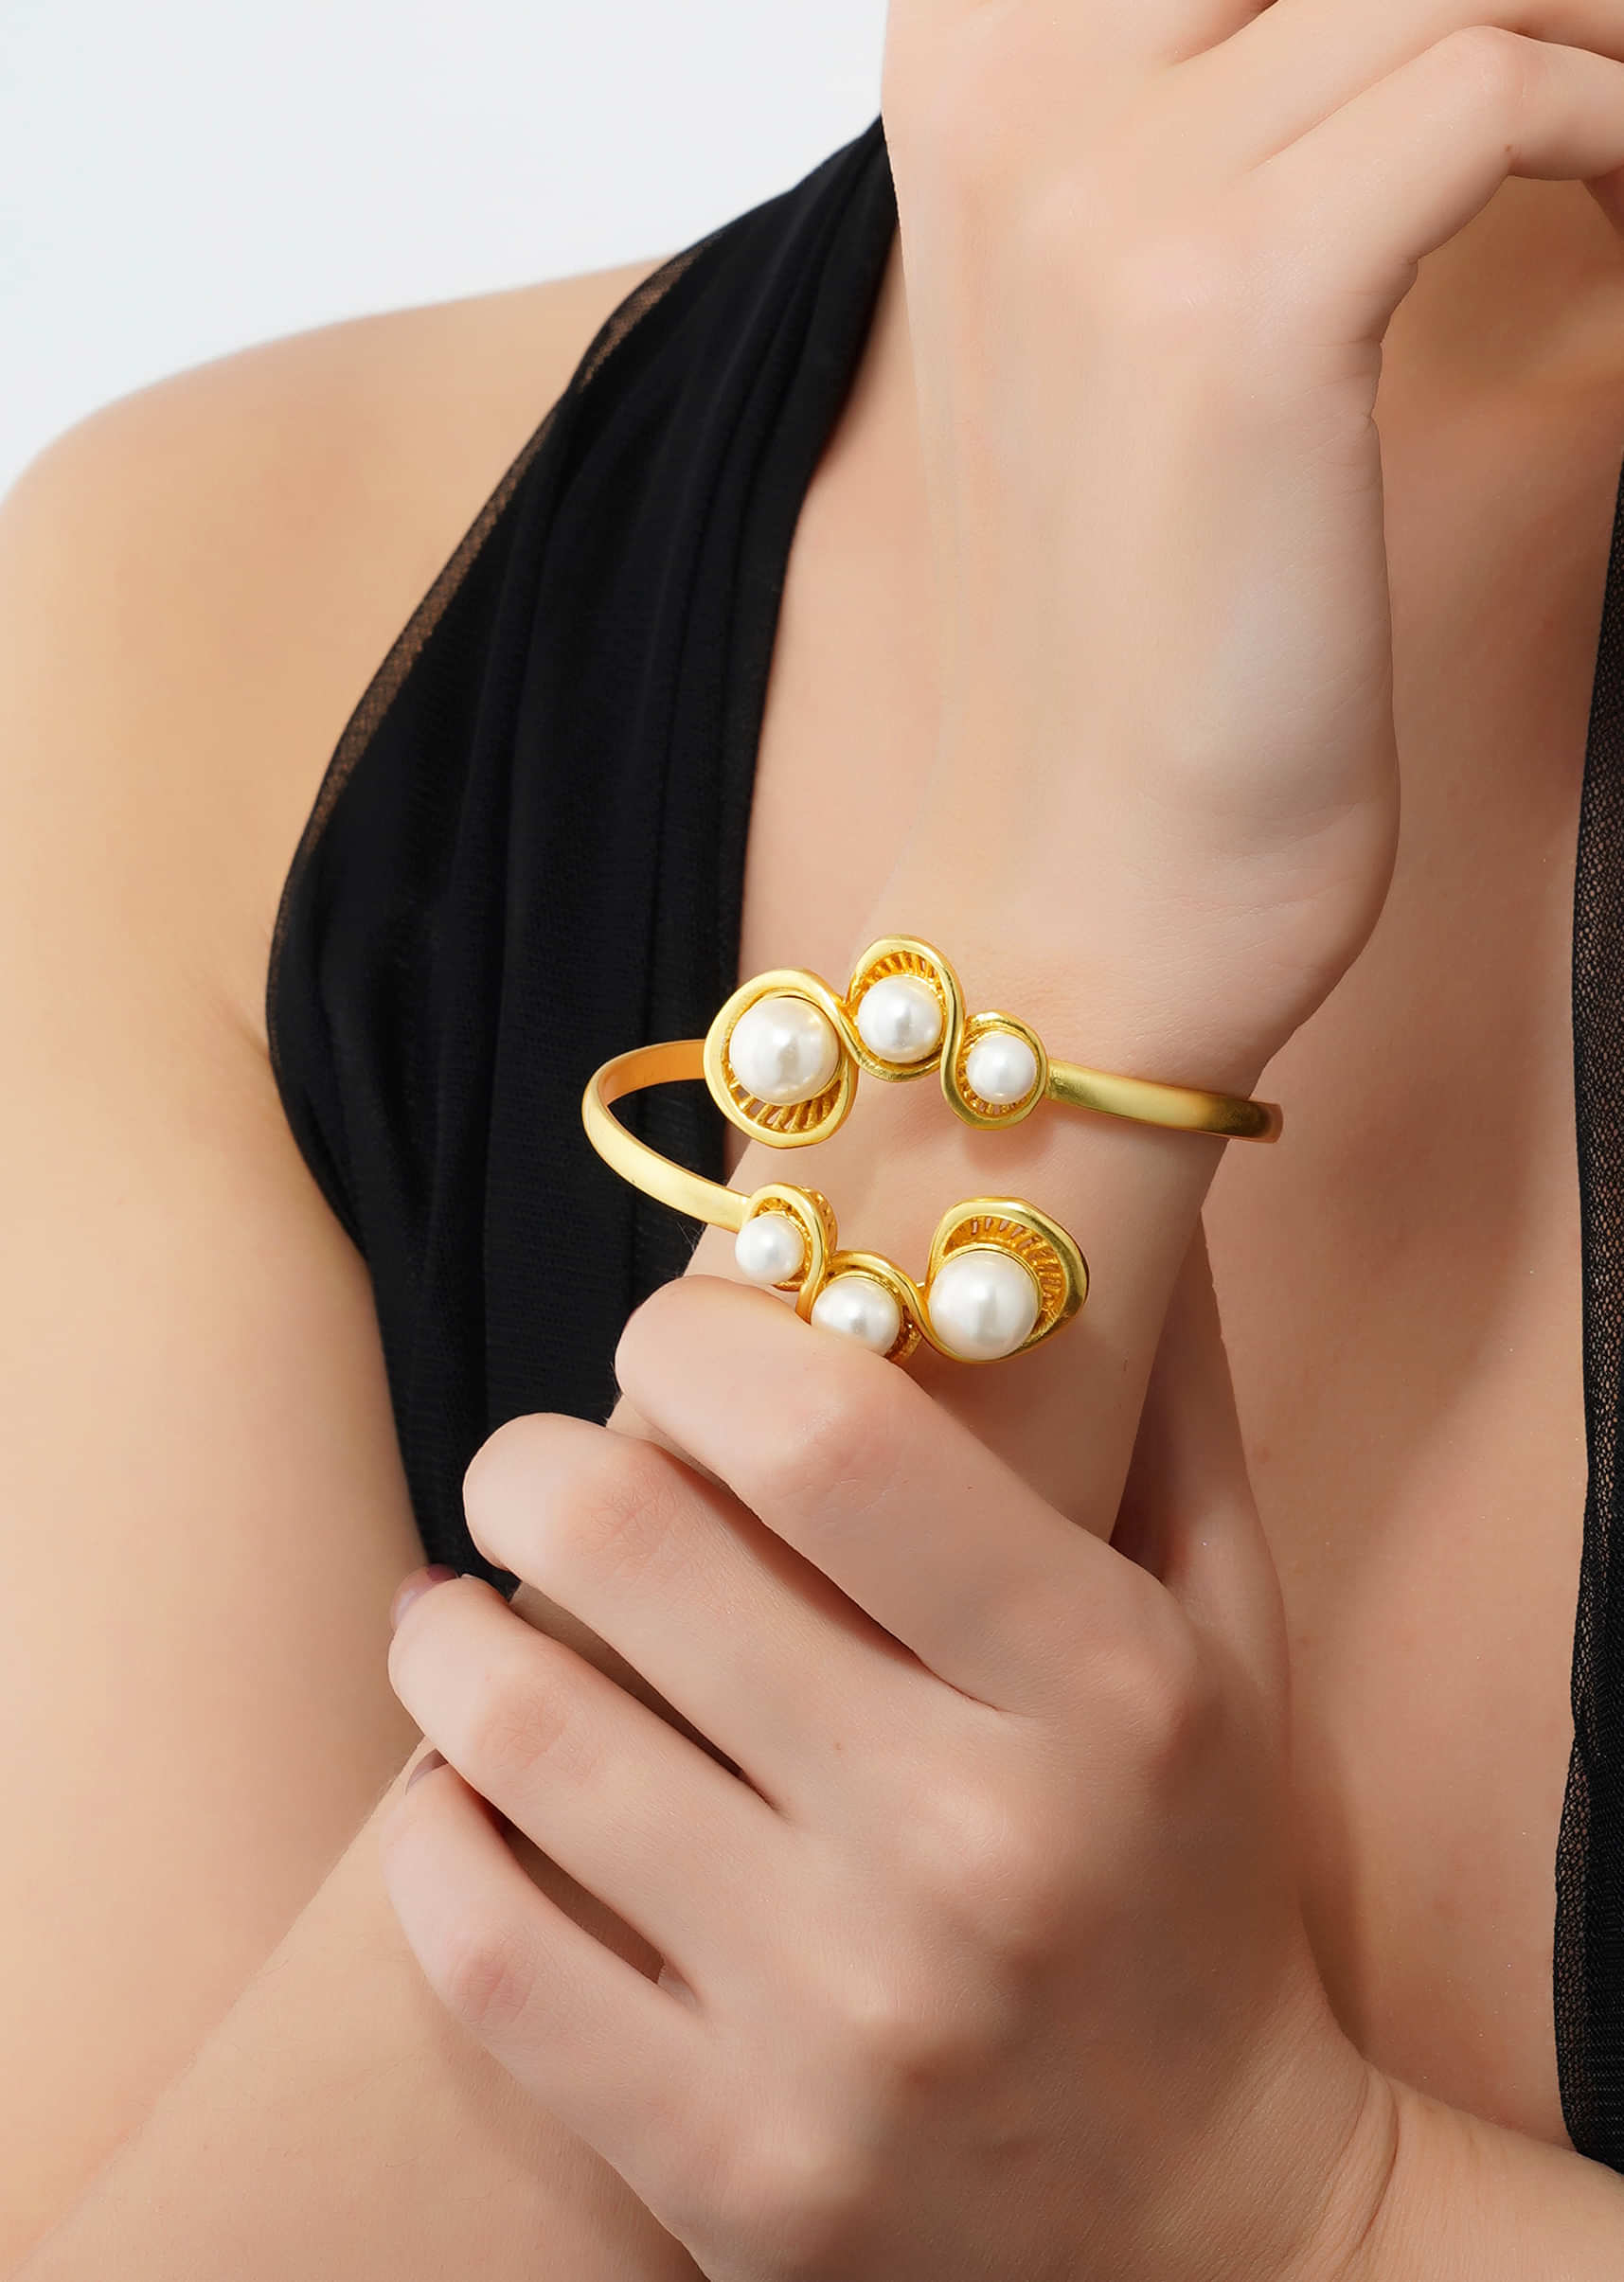 Gold 22K Cuff Bangle With White Shell Pearl 